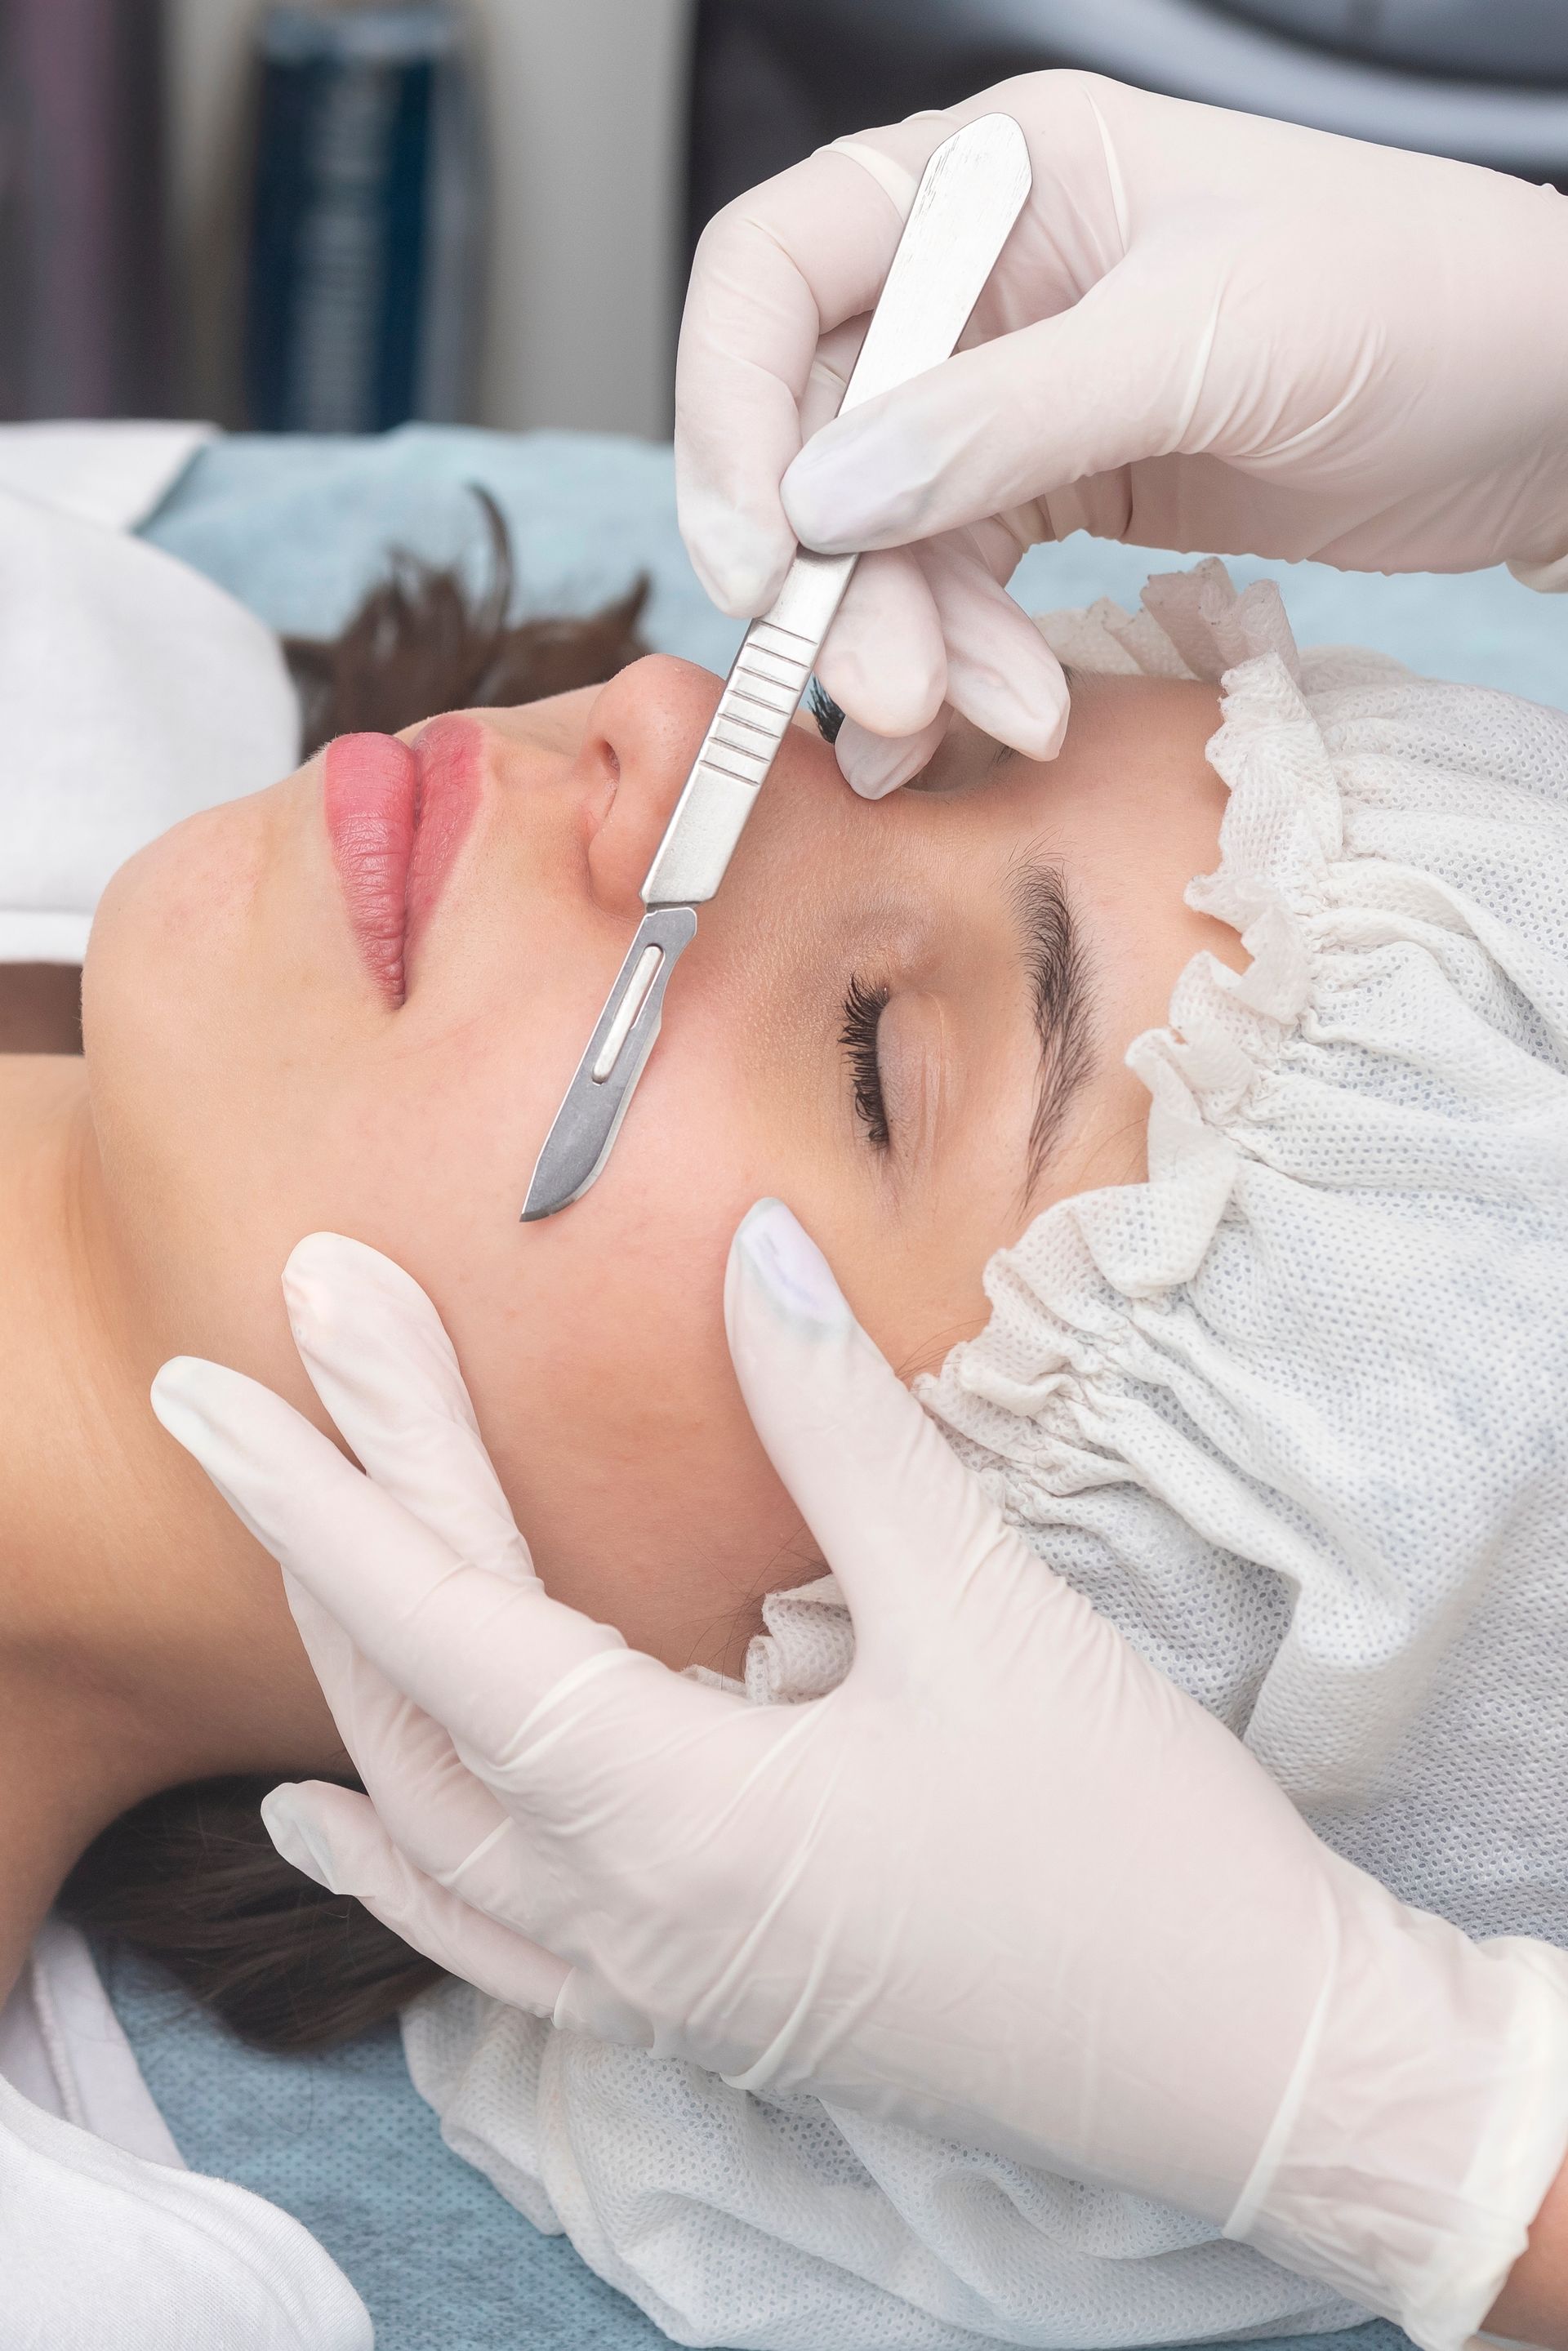 A woman is getting a facial treatment with a scalpel.